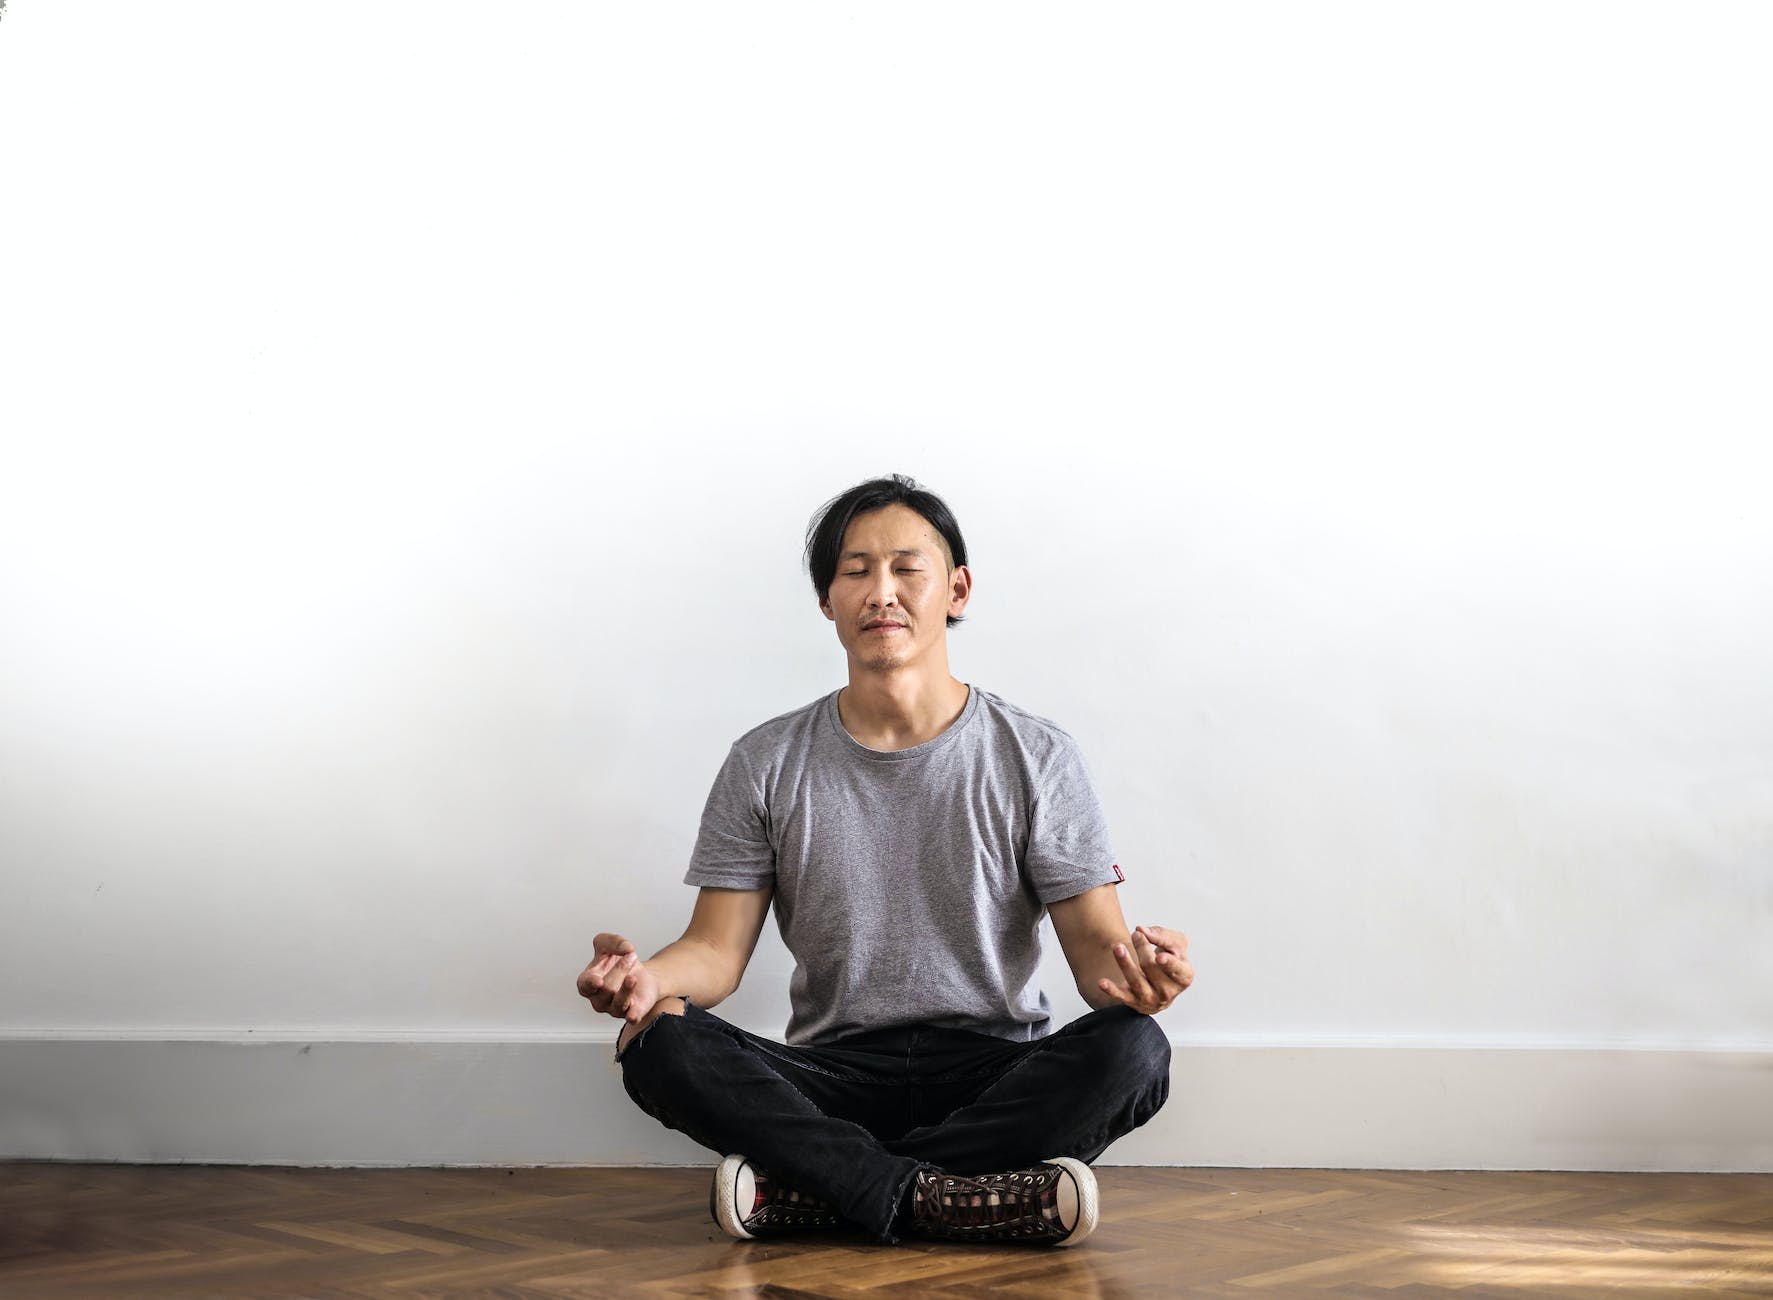 photo of man in gray t shirt and black jeans on sitting on wooden floor meditating
Photo by Andrea Piacquadio on Pexels.com